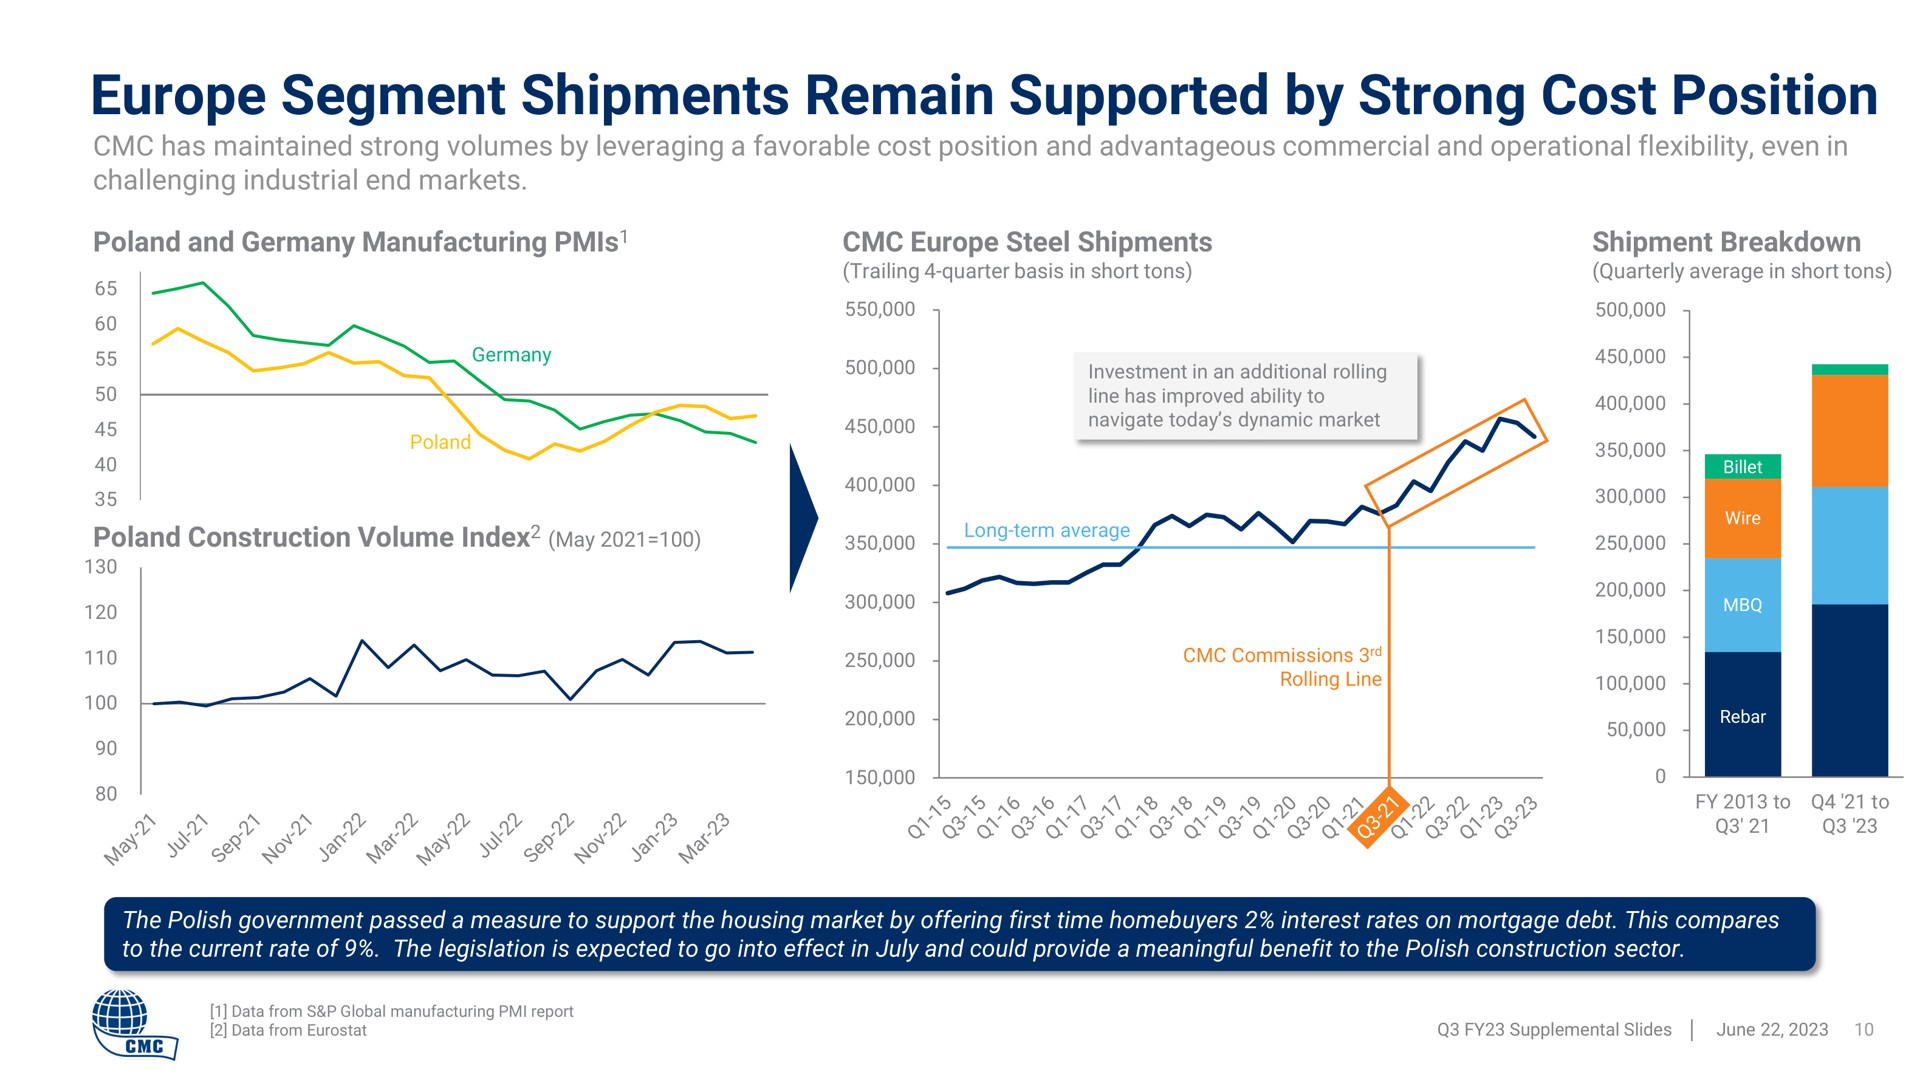 segment shipments remain supported by strong cost position | Commercial Metals Company